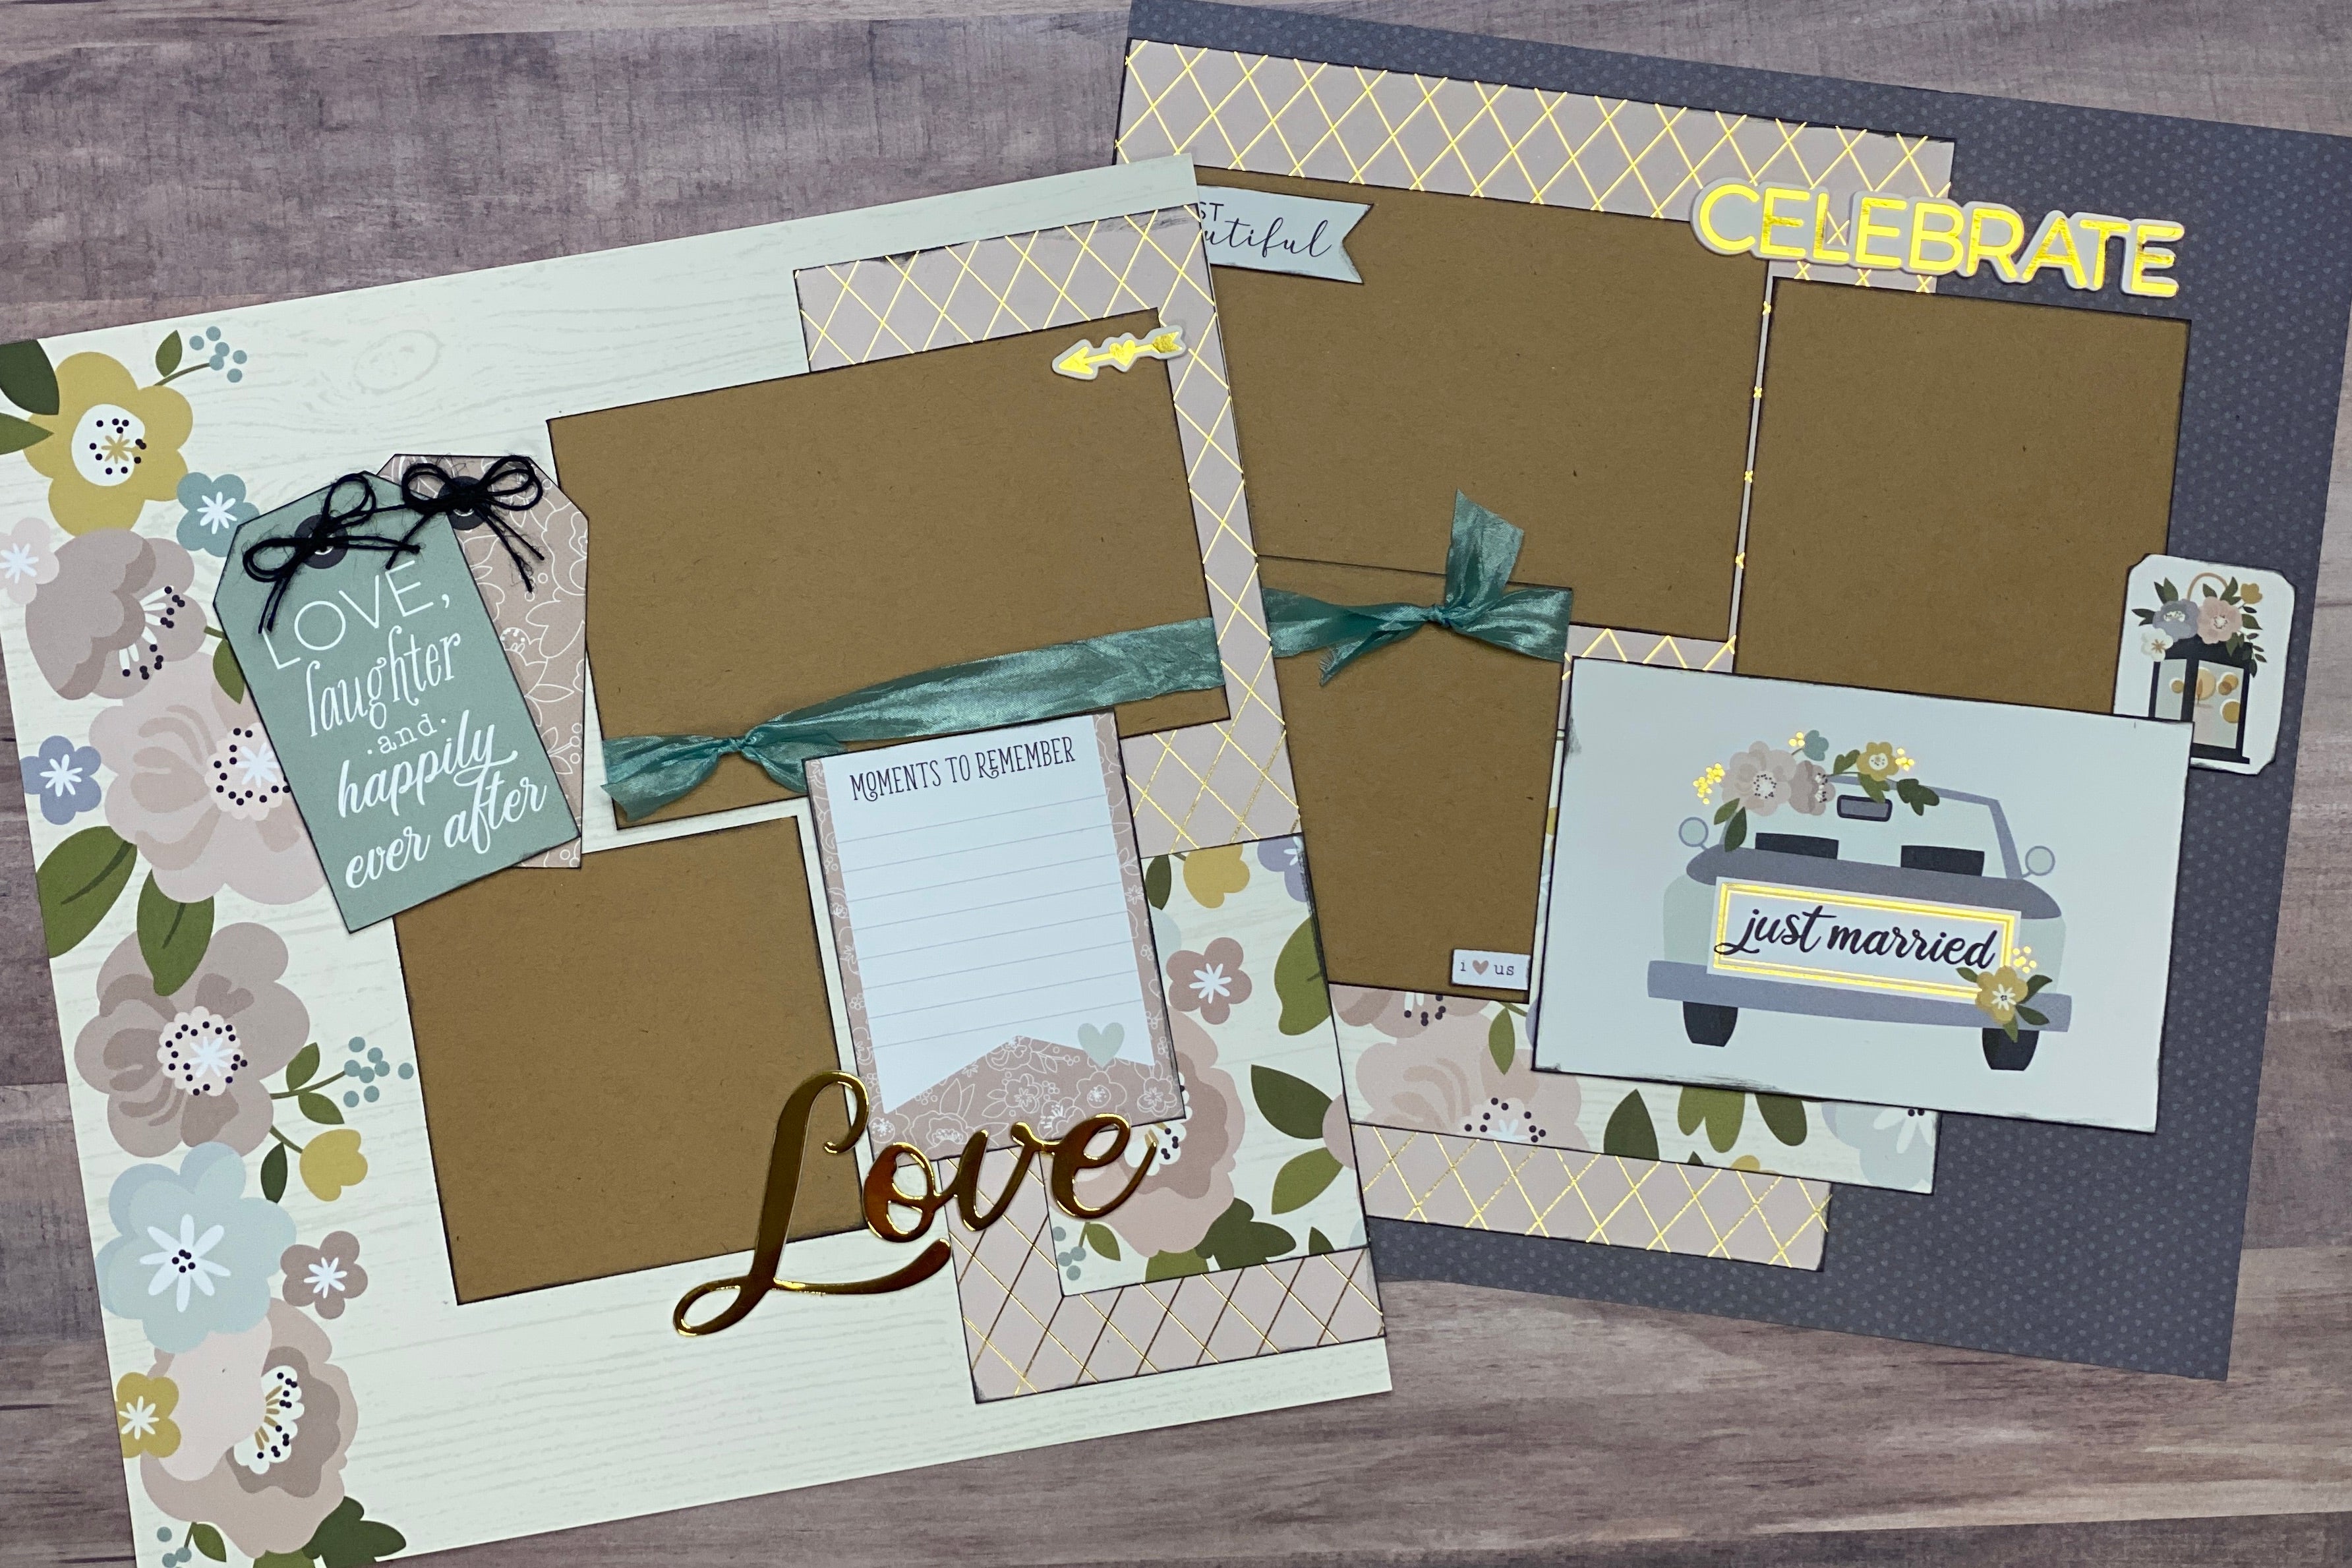 Love, Laughter and Happily Ever After, Wedding Themed 2 Page